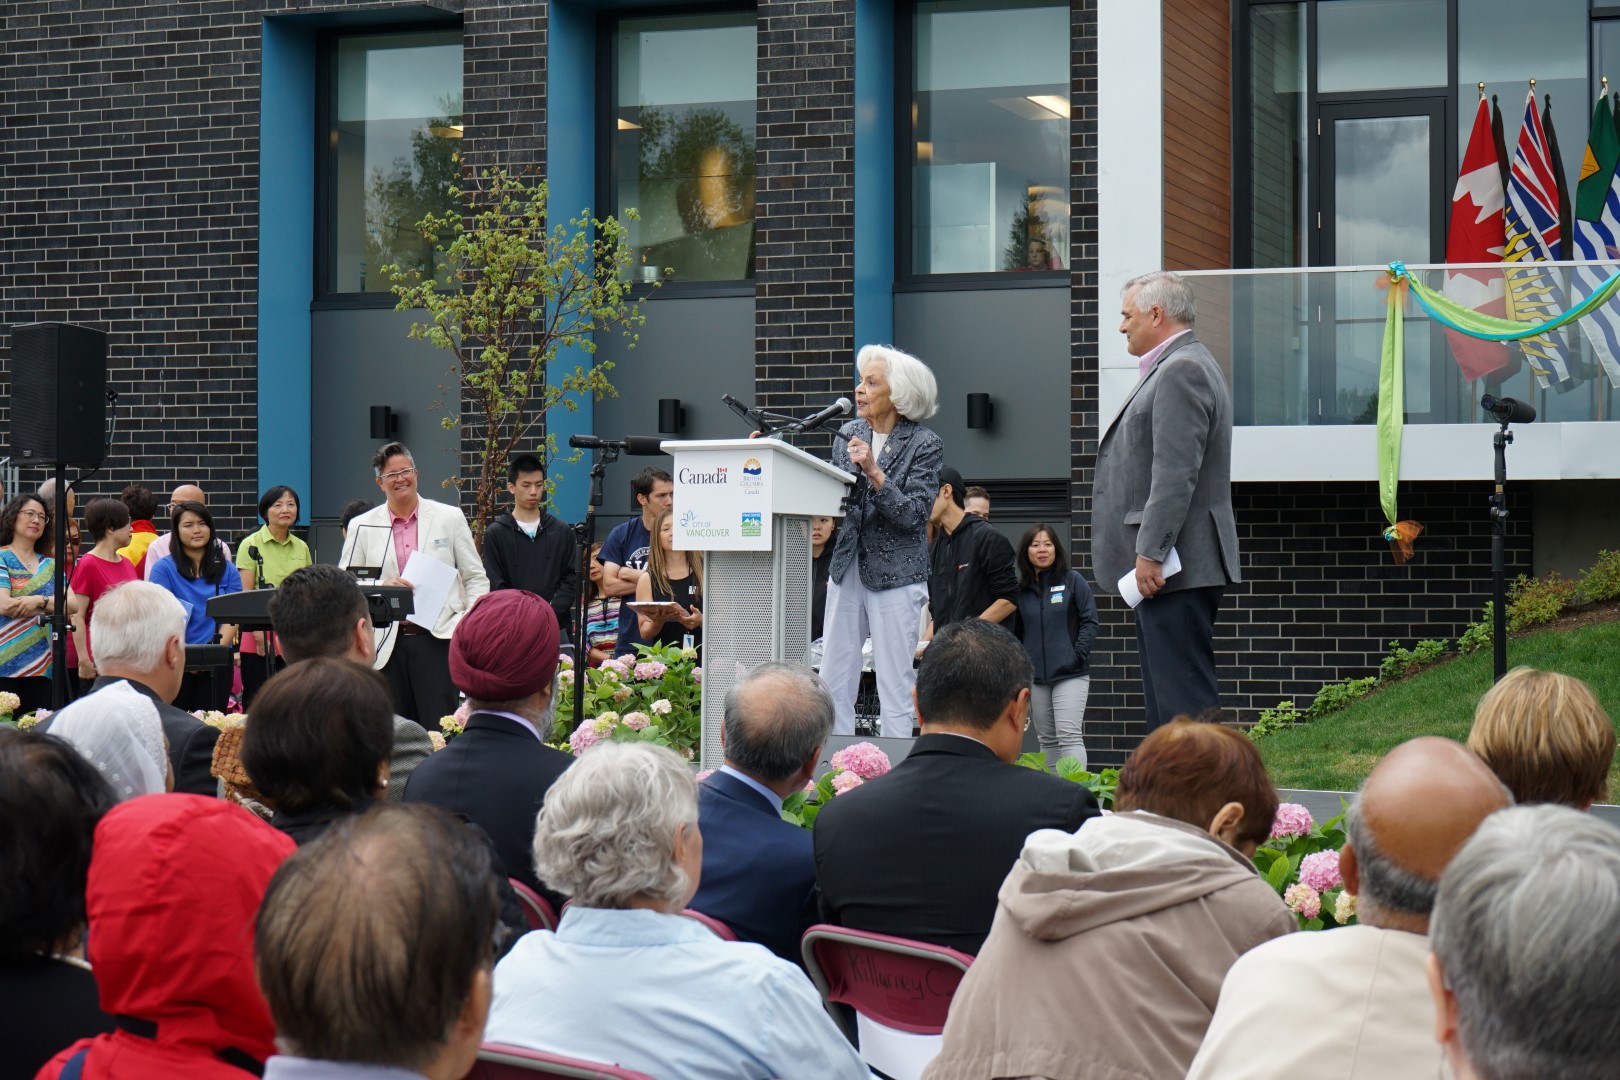 Lorna Gibbs speaking at the Grand Opening, June 28, at Killarney Community Centre. Photo: Willie Yeung